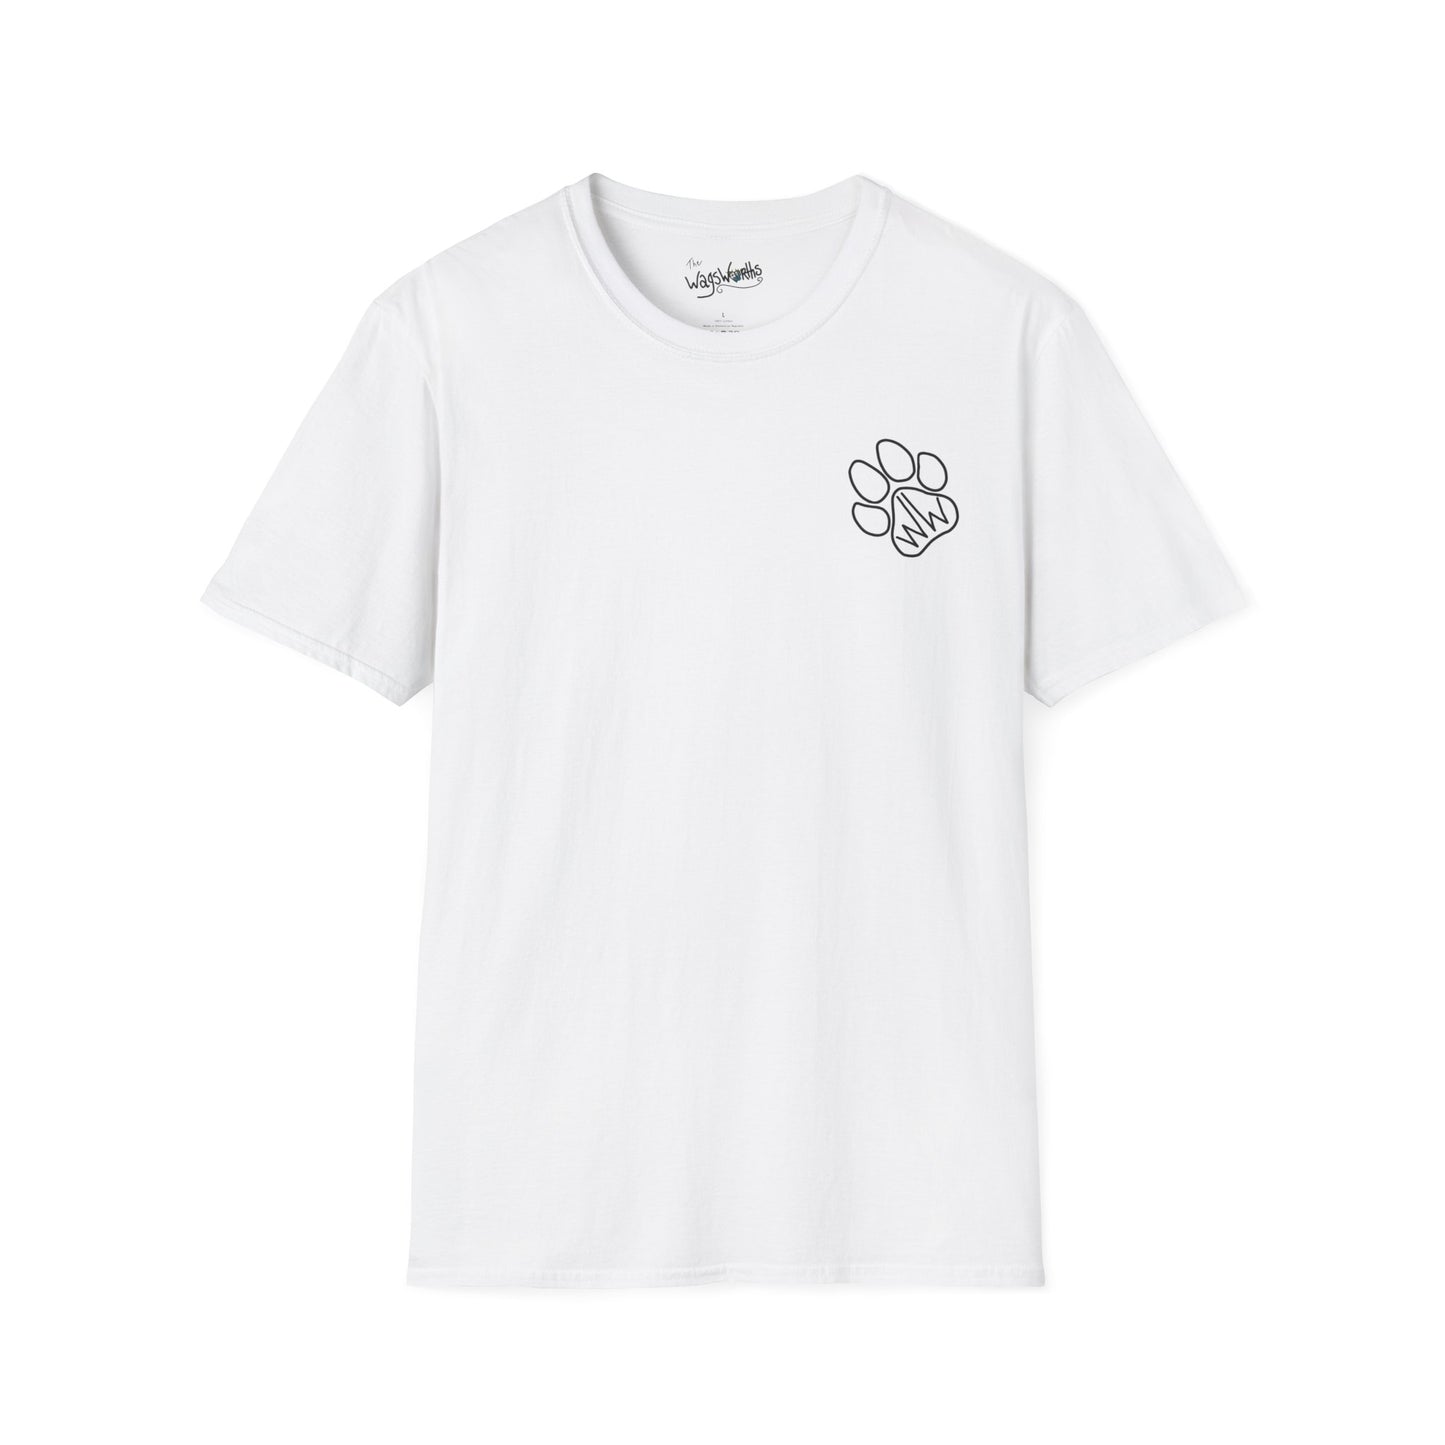 State 48 Graphic Tee